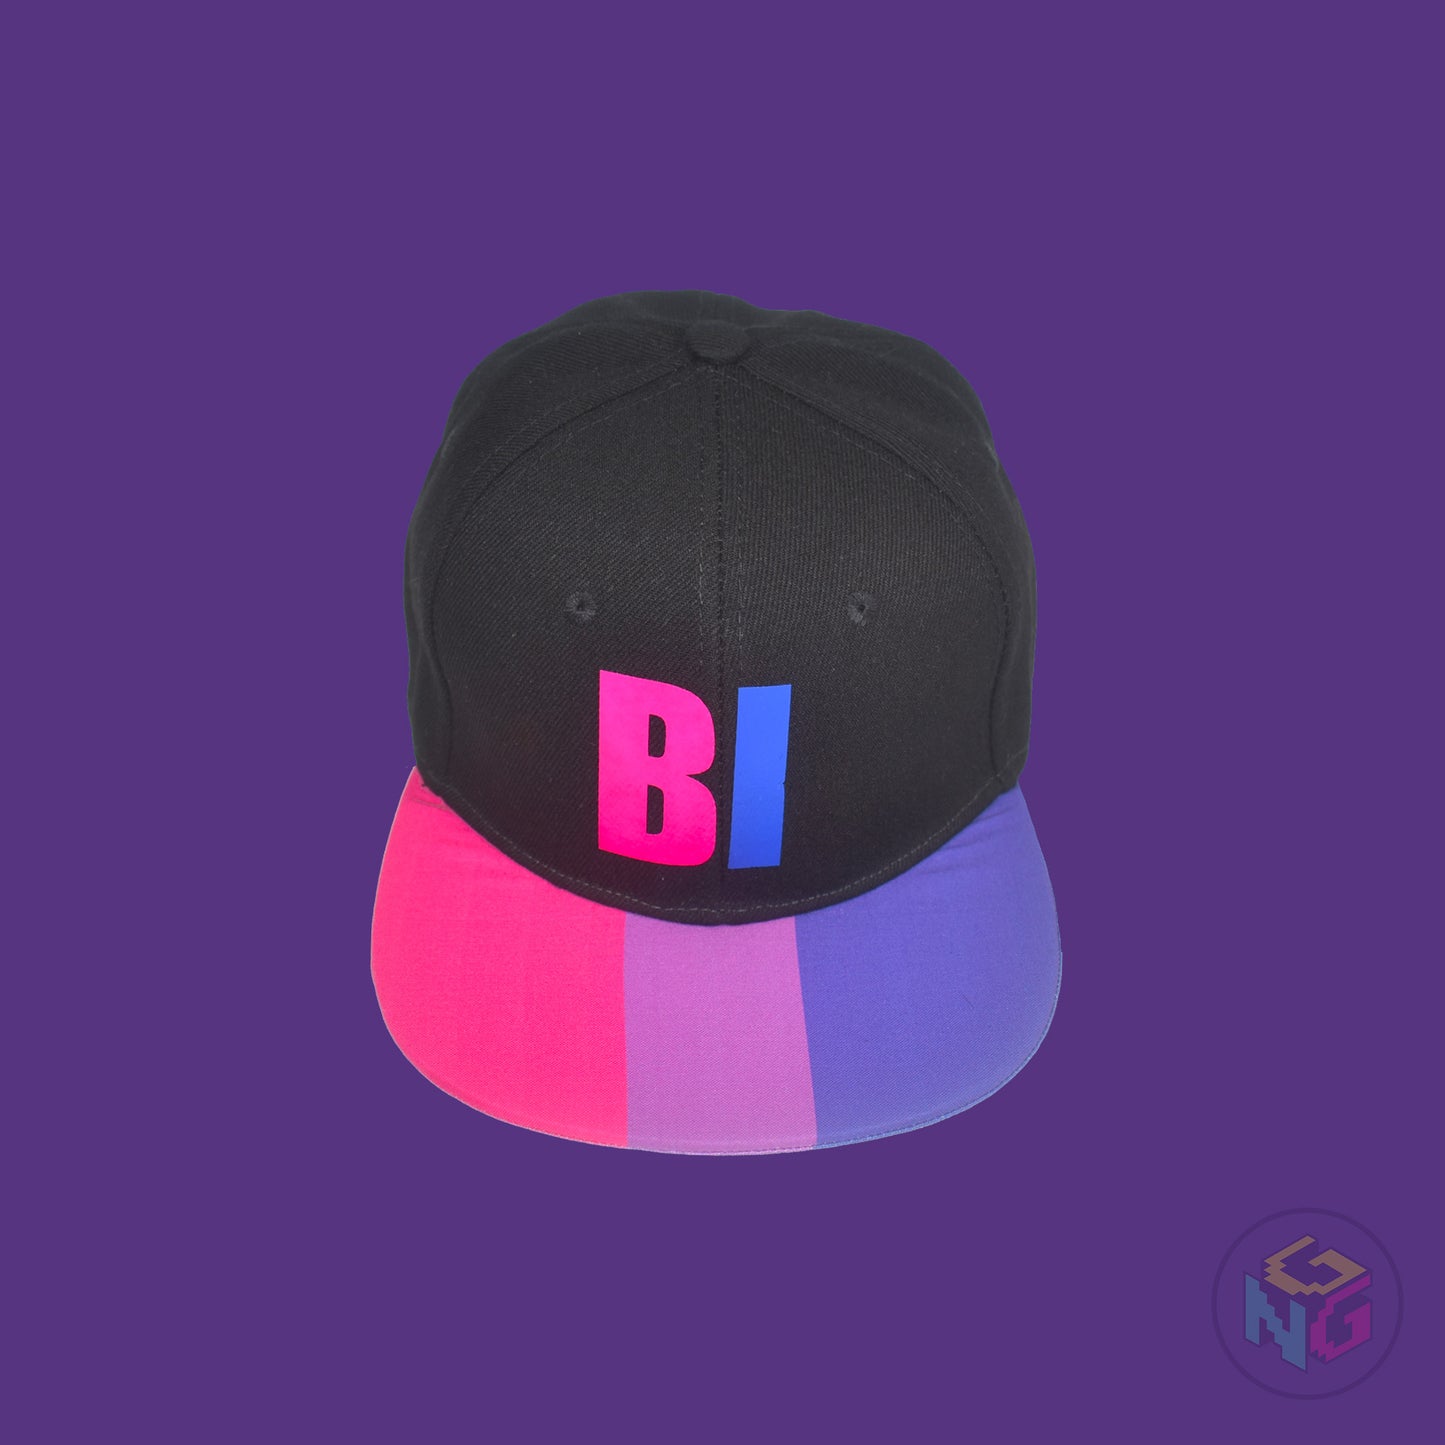 Black flat bill snapback hat. The brim has the bisexual pride flag on both sides and the front of the hat has the word “BI” in pink and blue. Front top view